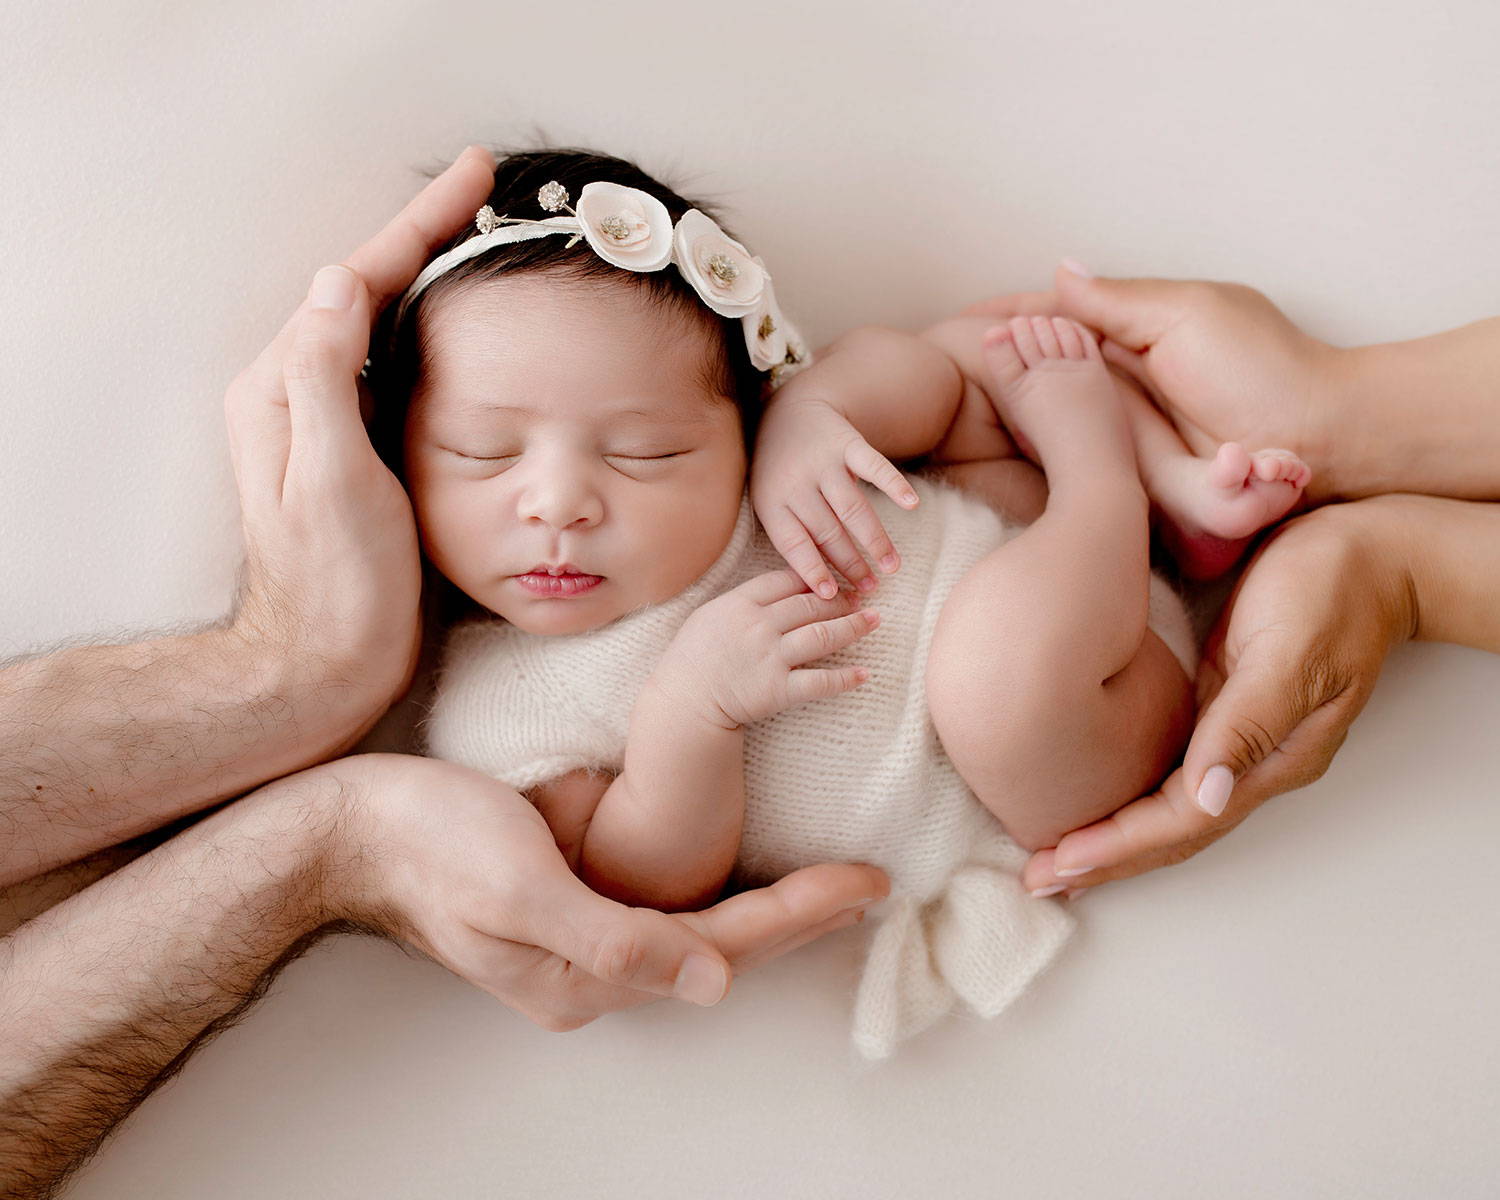 11 Photoshop Tips You Can Use To Perfect Your Newborn Images By Jordan Webster